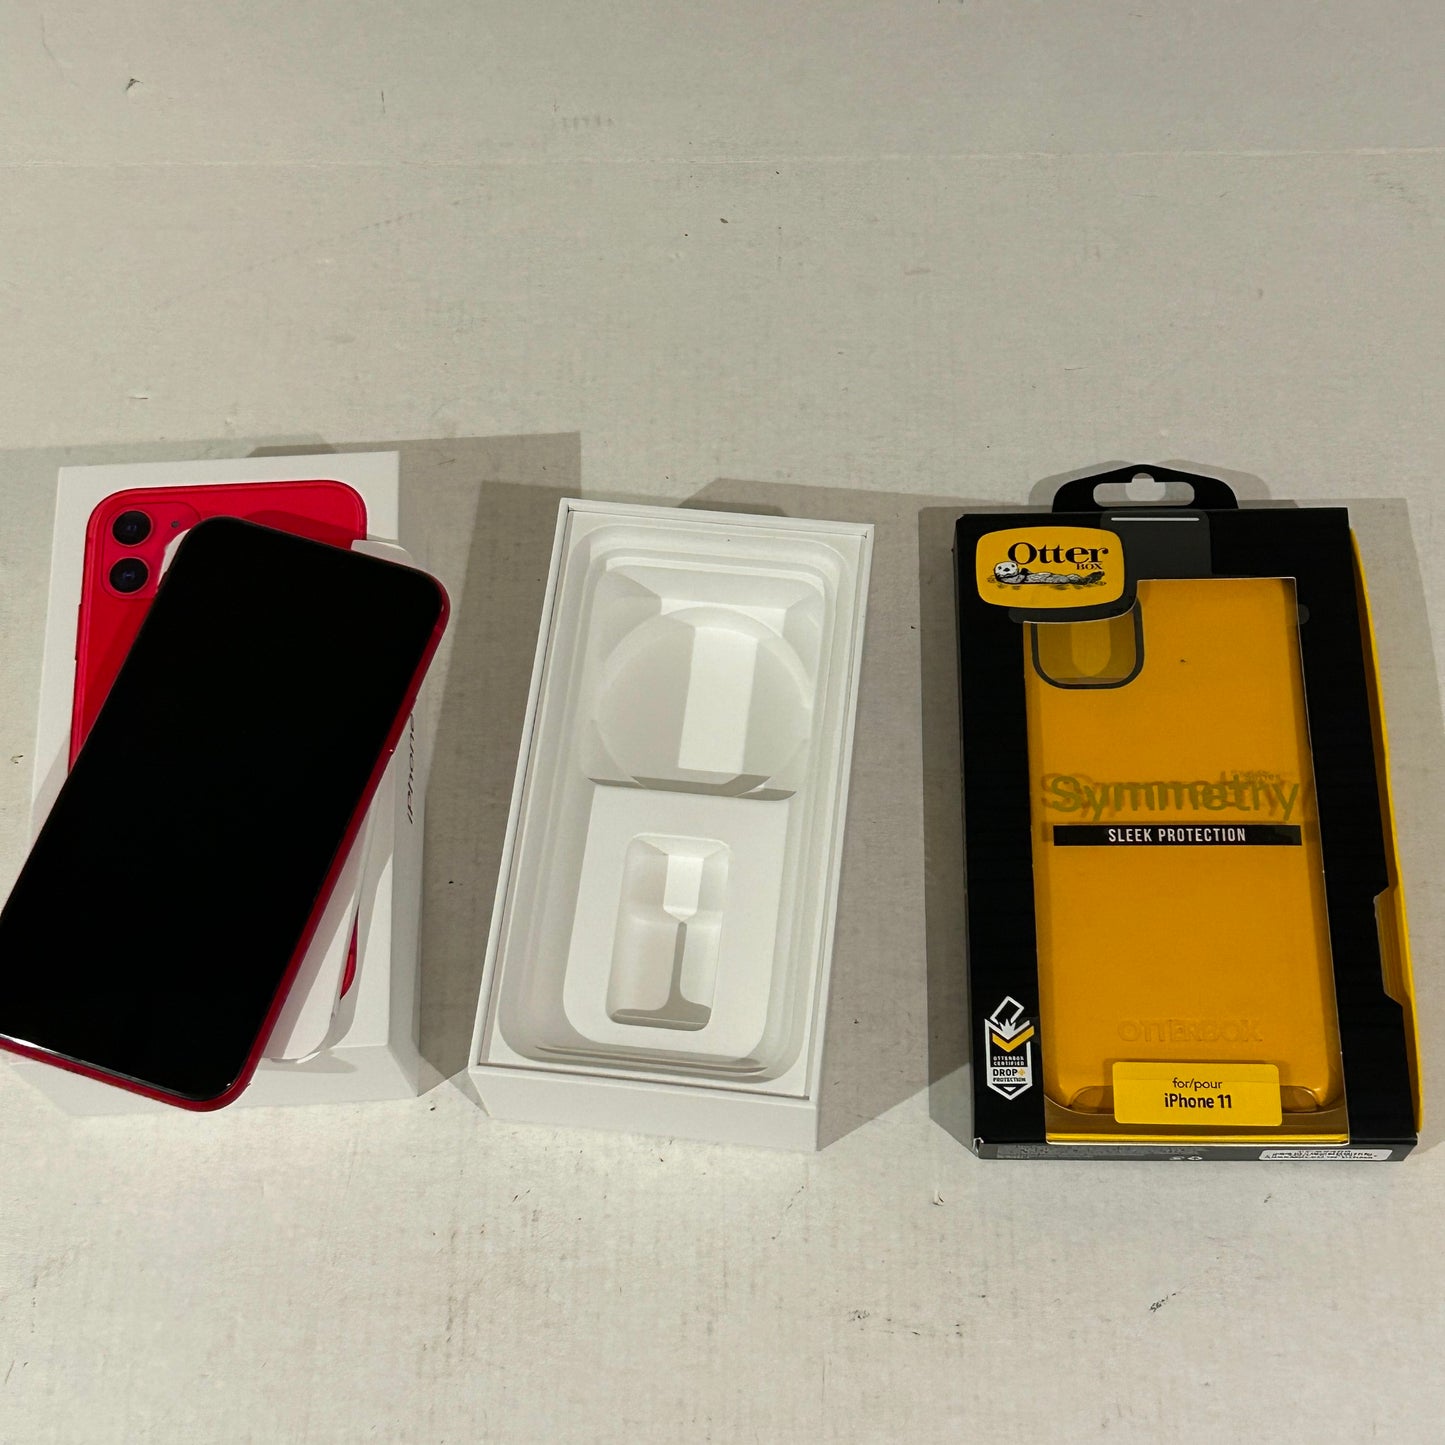 128 GB Product Red iPhone 11 Rogers